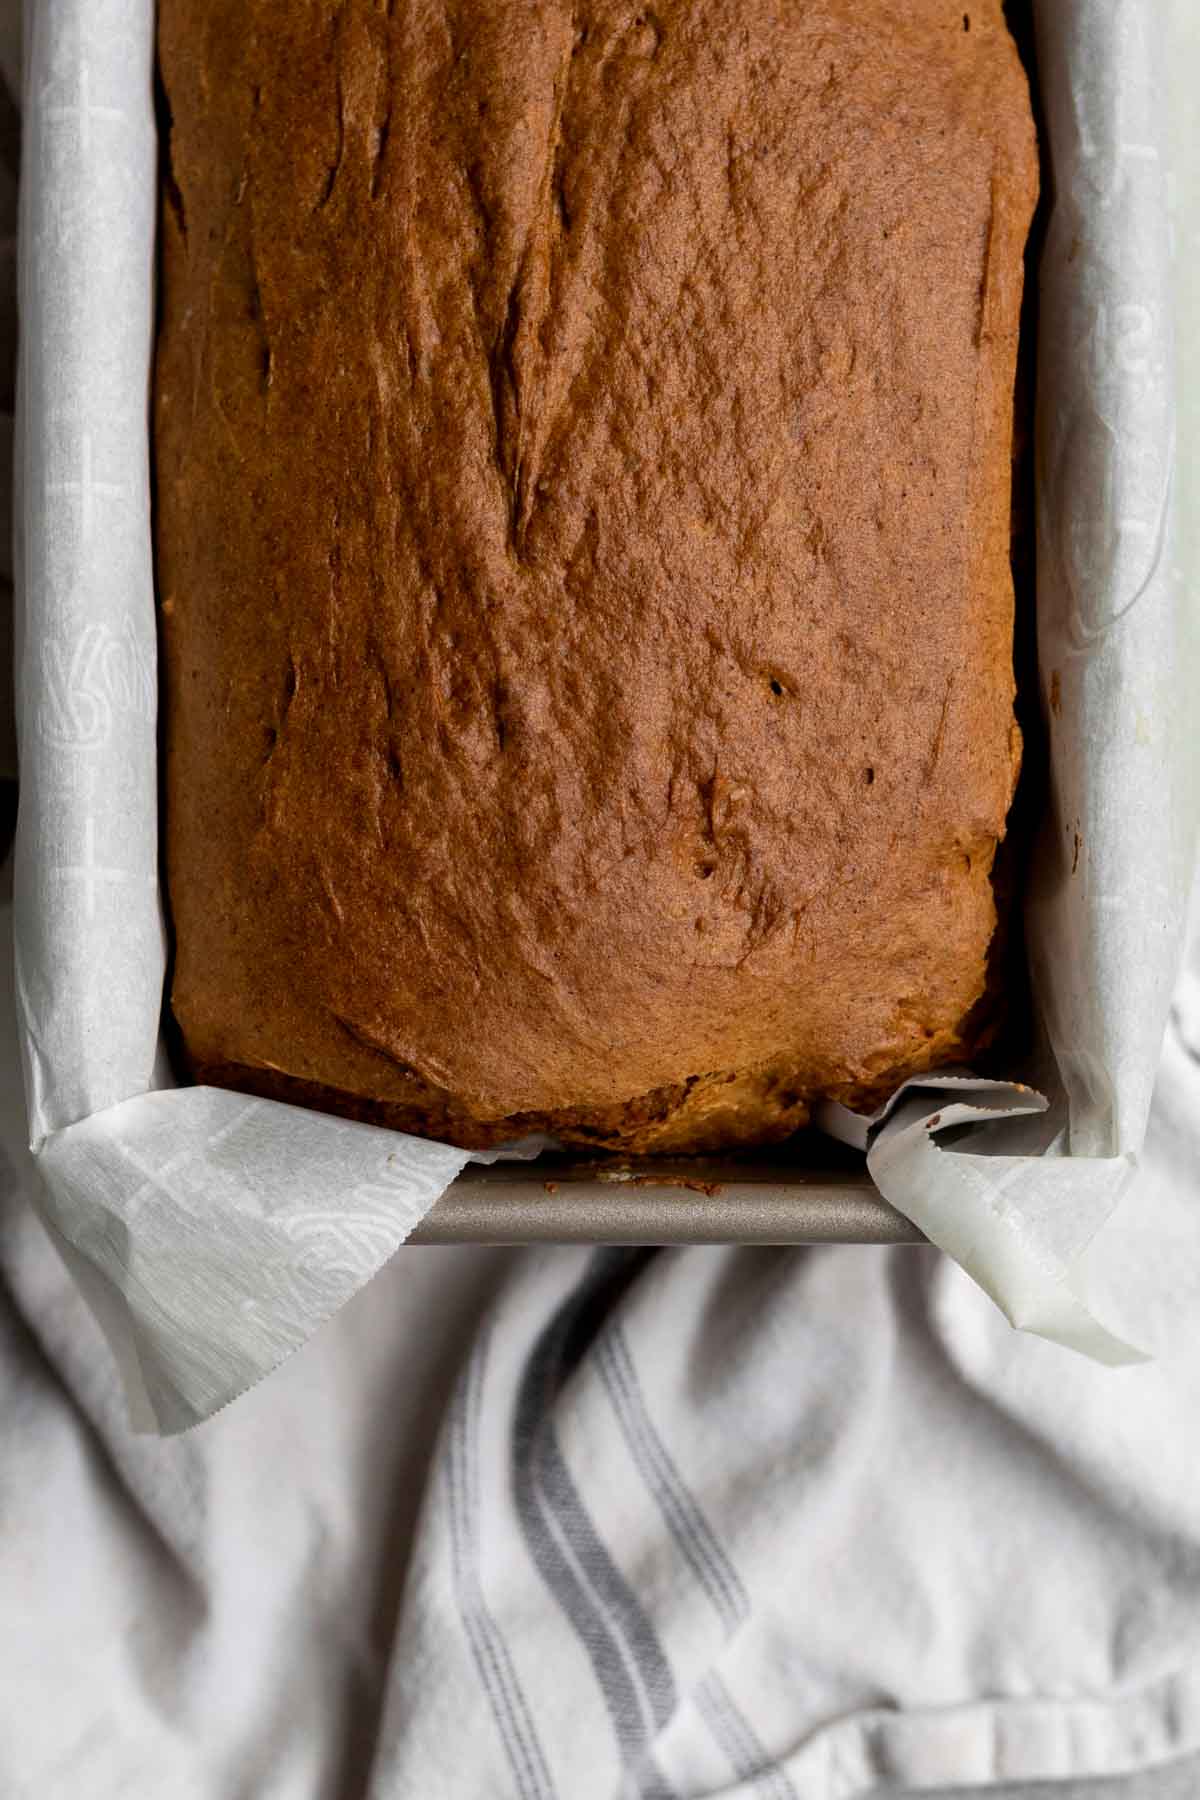 Golden brown bread from the oven.